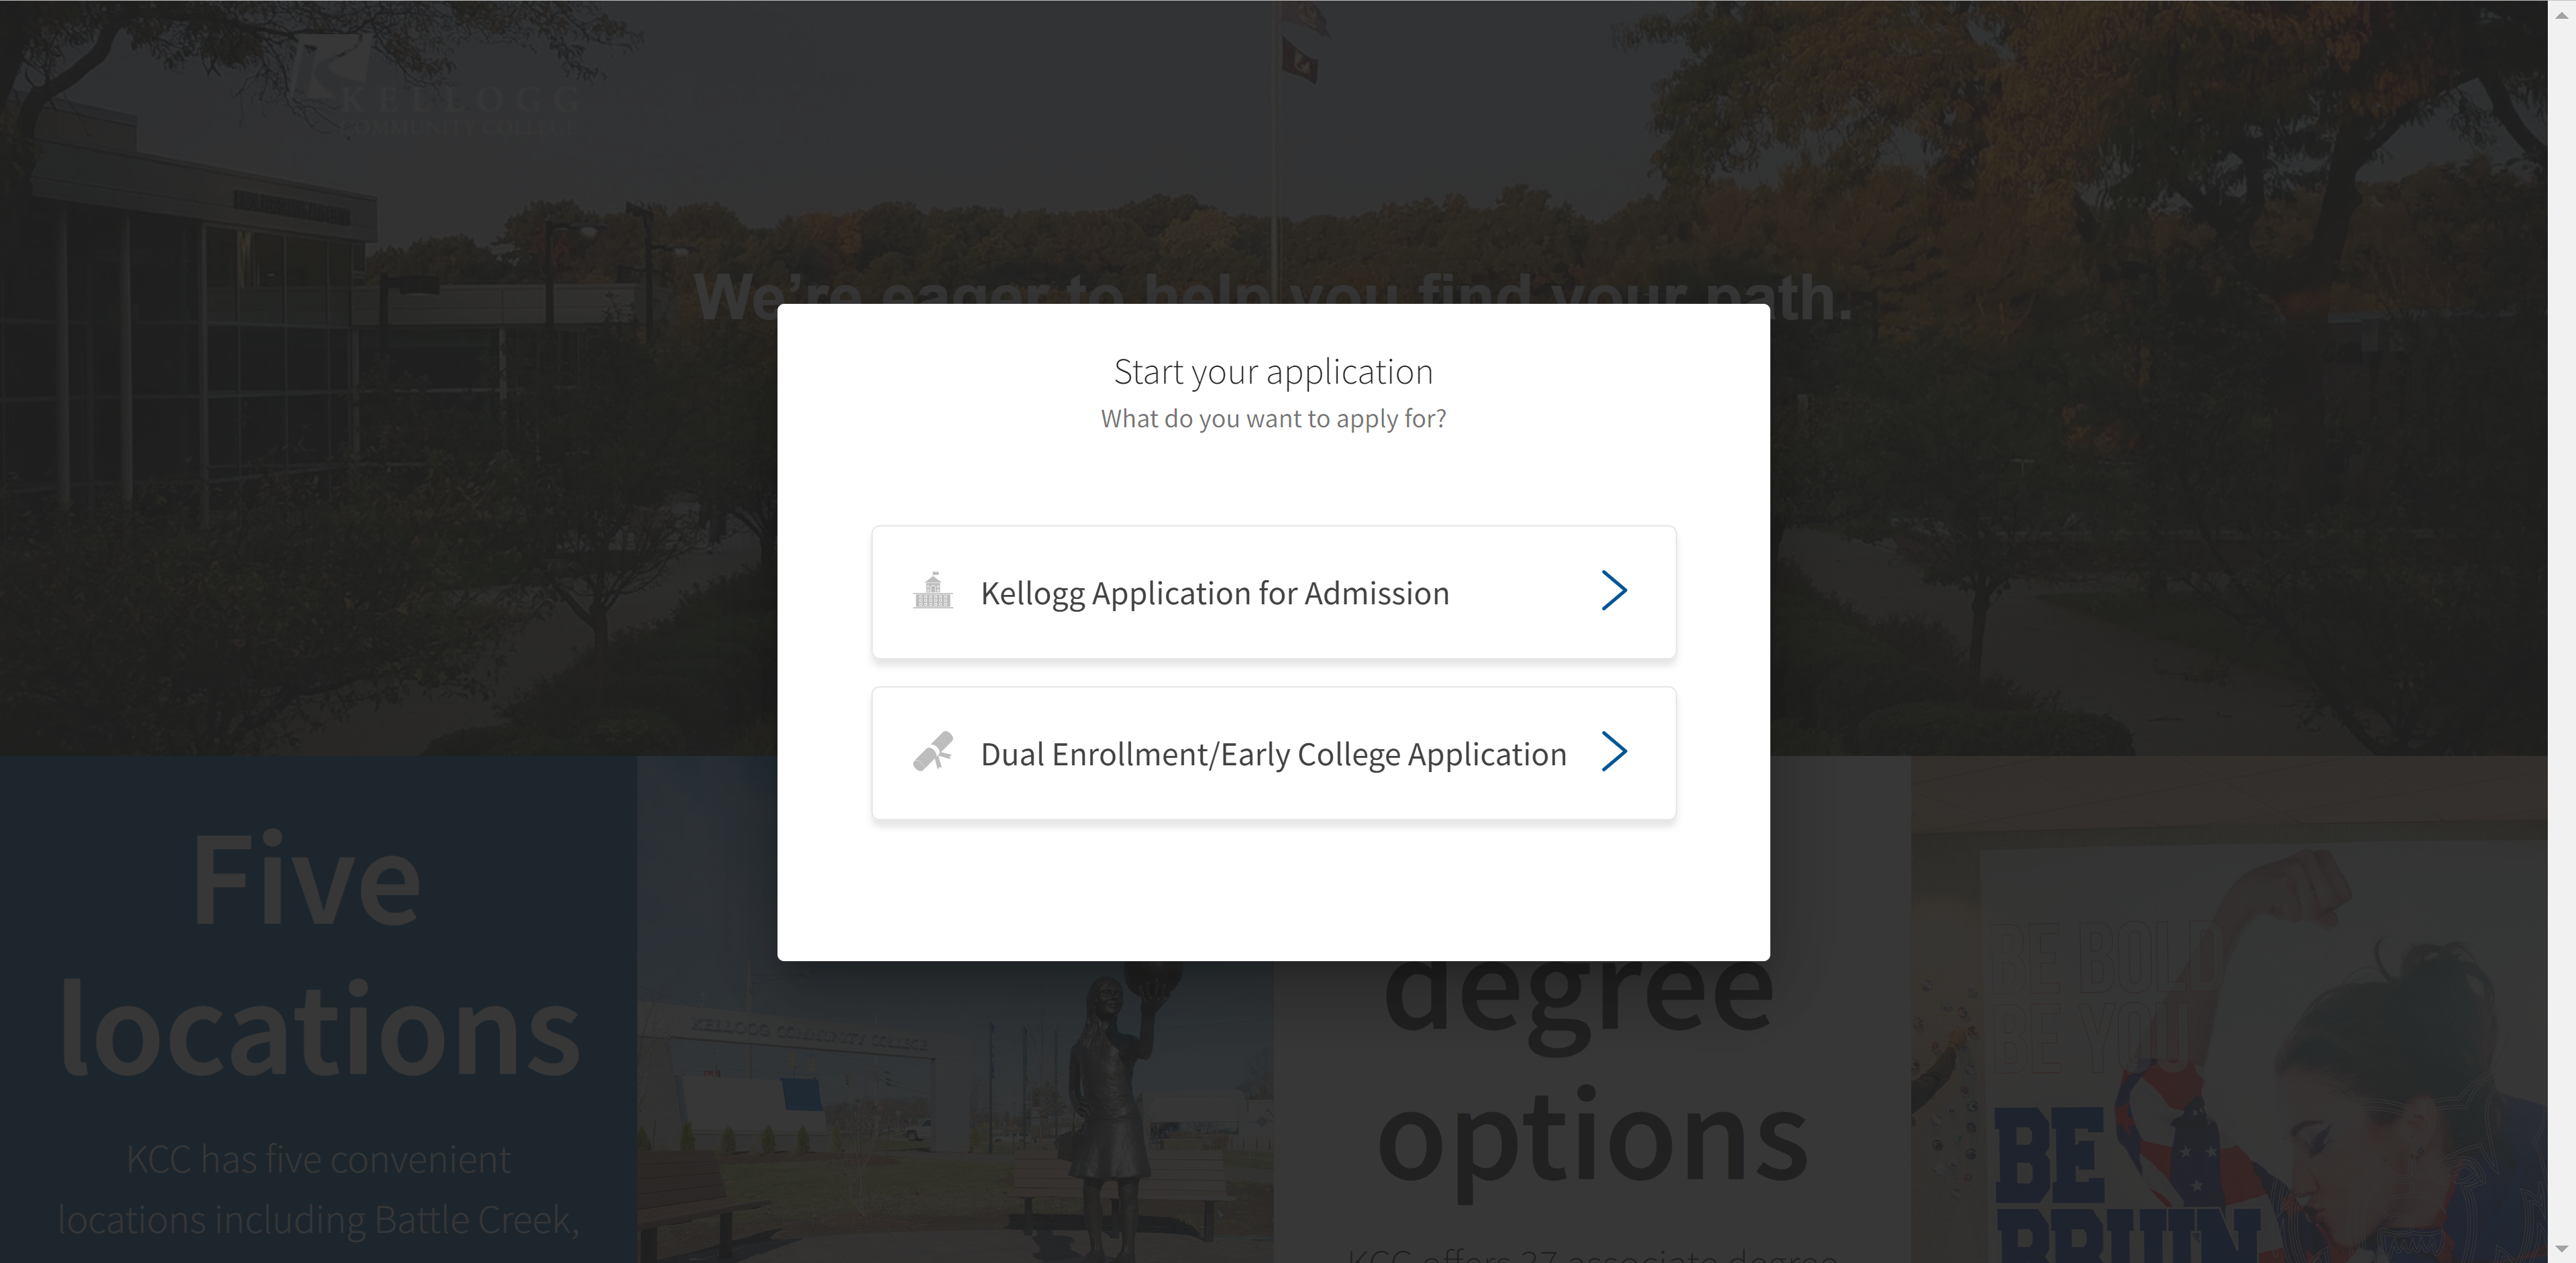 Application or dual enrollment early college application image